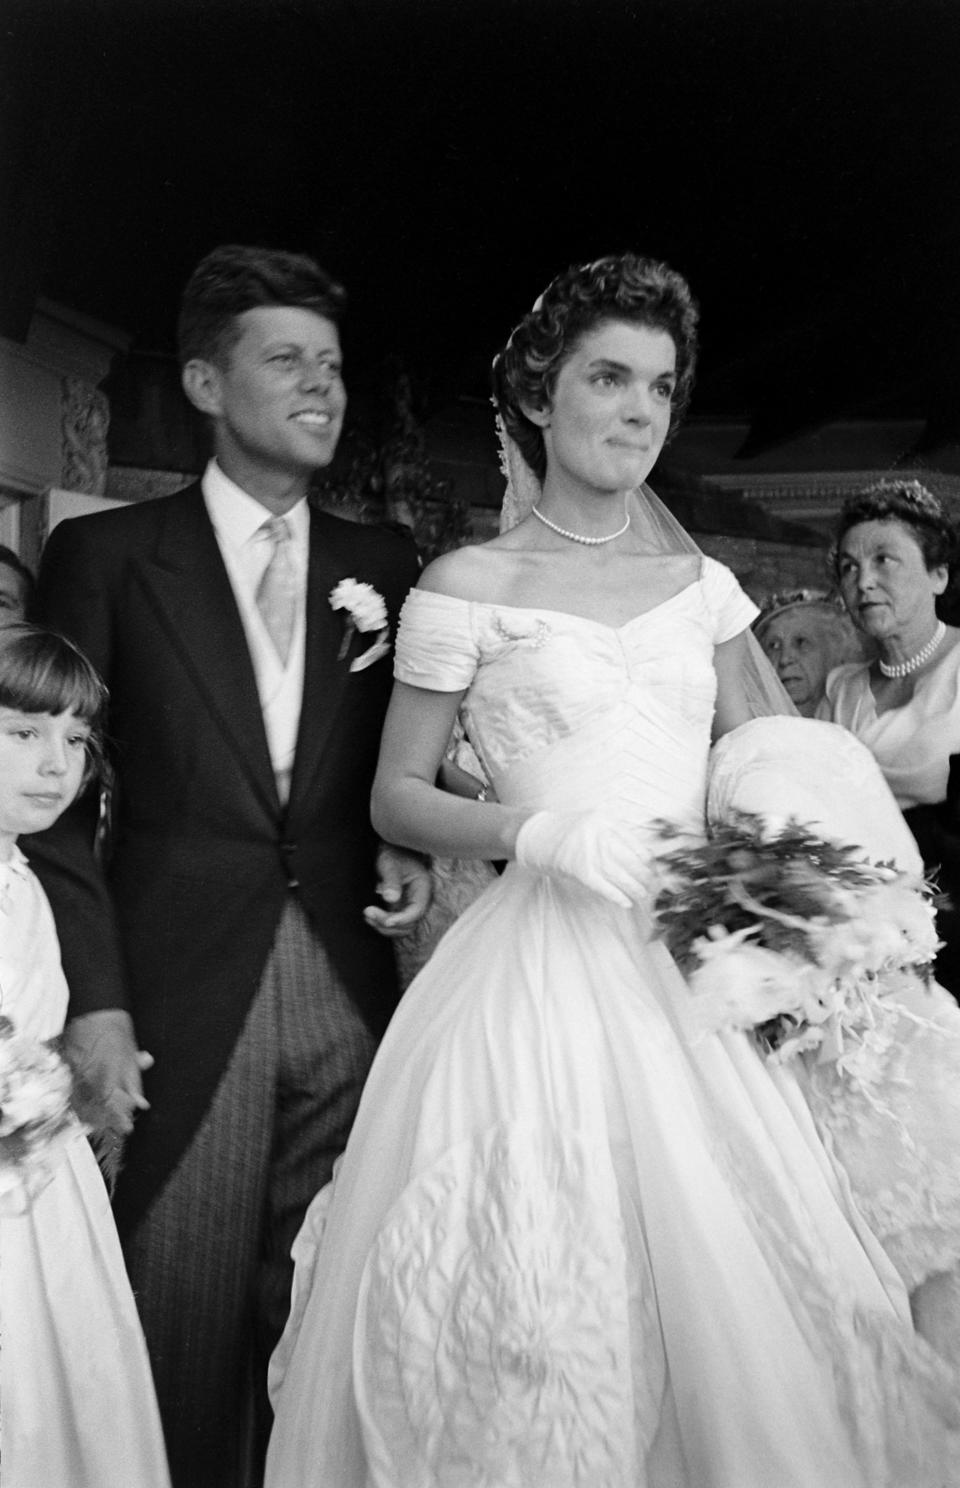 Future US President John F Kennedy (1917 - 1963) and Jacqueline Kennedy (1929 - 1994) (in a Battenburg wedding dress) stand in front of St Mary's Church after their wedding ceremony, Newport, Rhode Island, September 12, 1953. (Photo by Lisa Larsen/Time & Life Pictures/Getty Images)